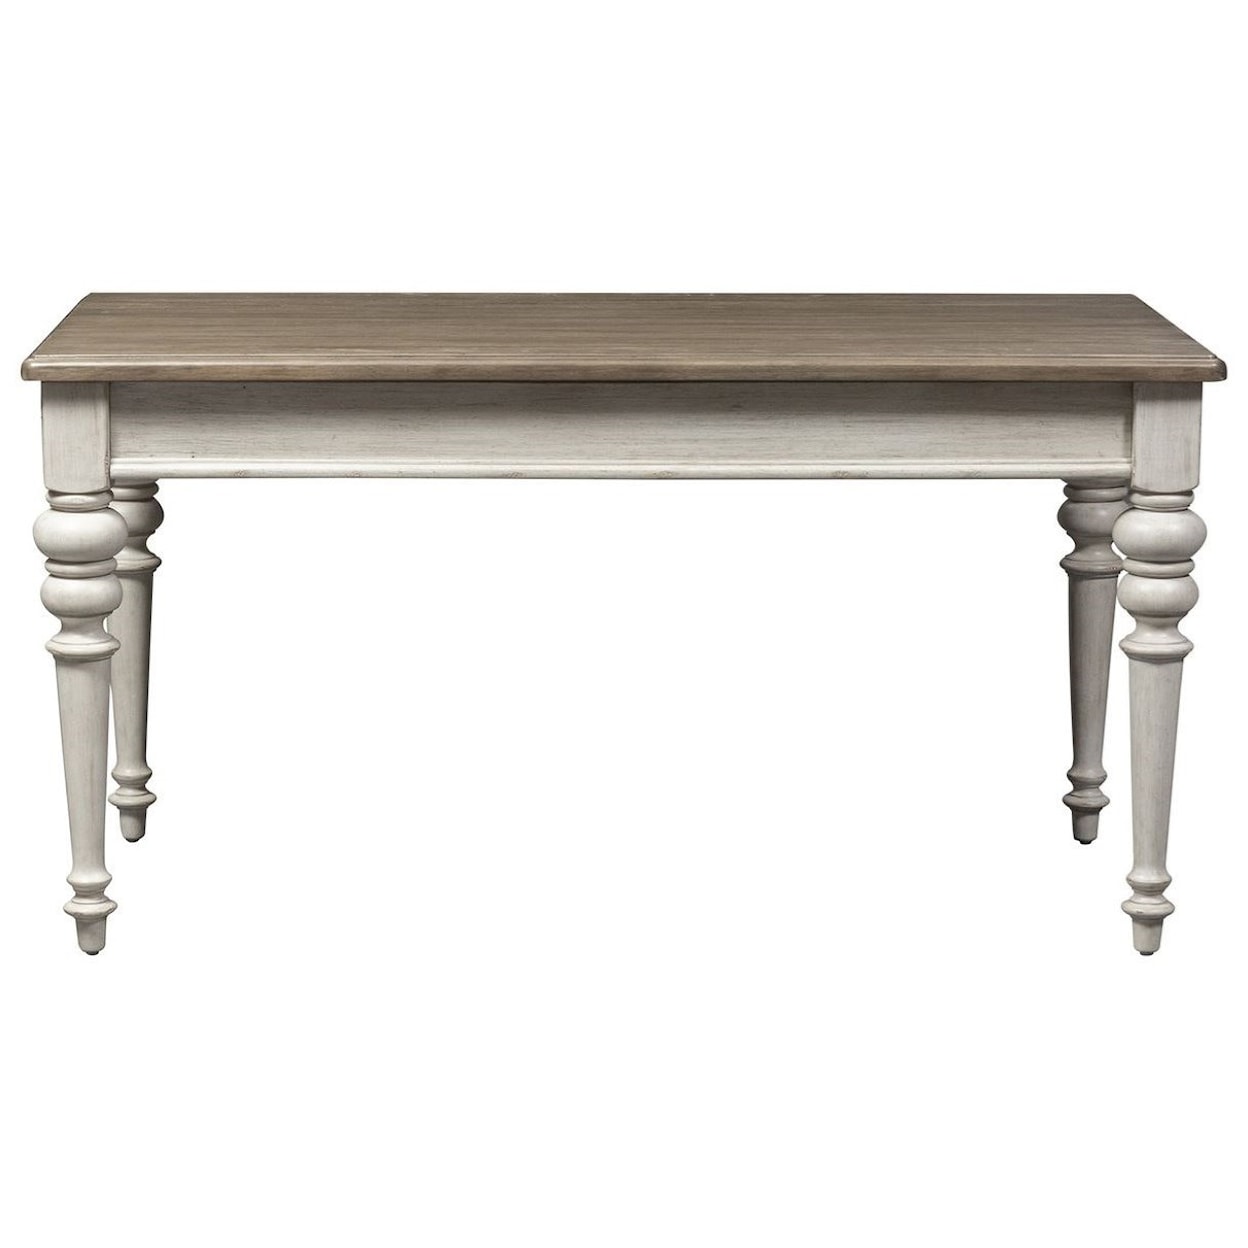 Libby Haven Lift Top Writing Desk